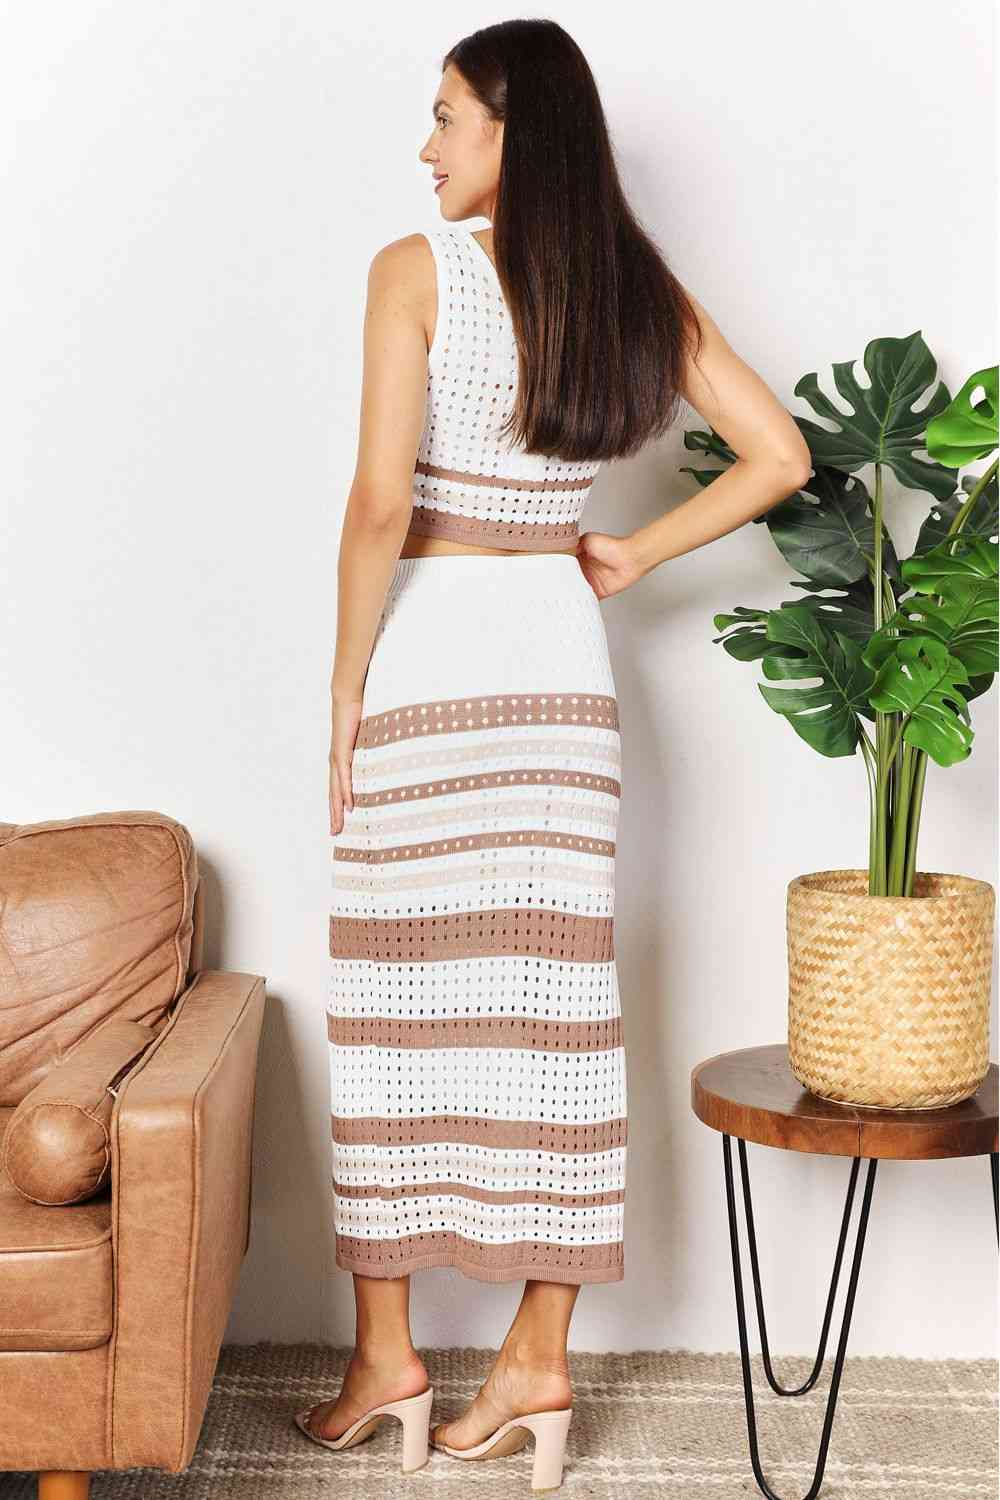 Light Gray Double Take Striped Openwork Cropped Tank and Split Skirt Set Sentient Beauty Fashions Apparel & Accessories